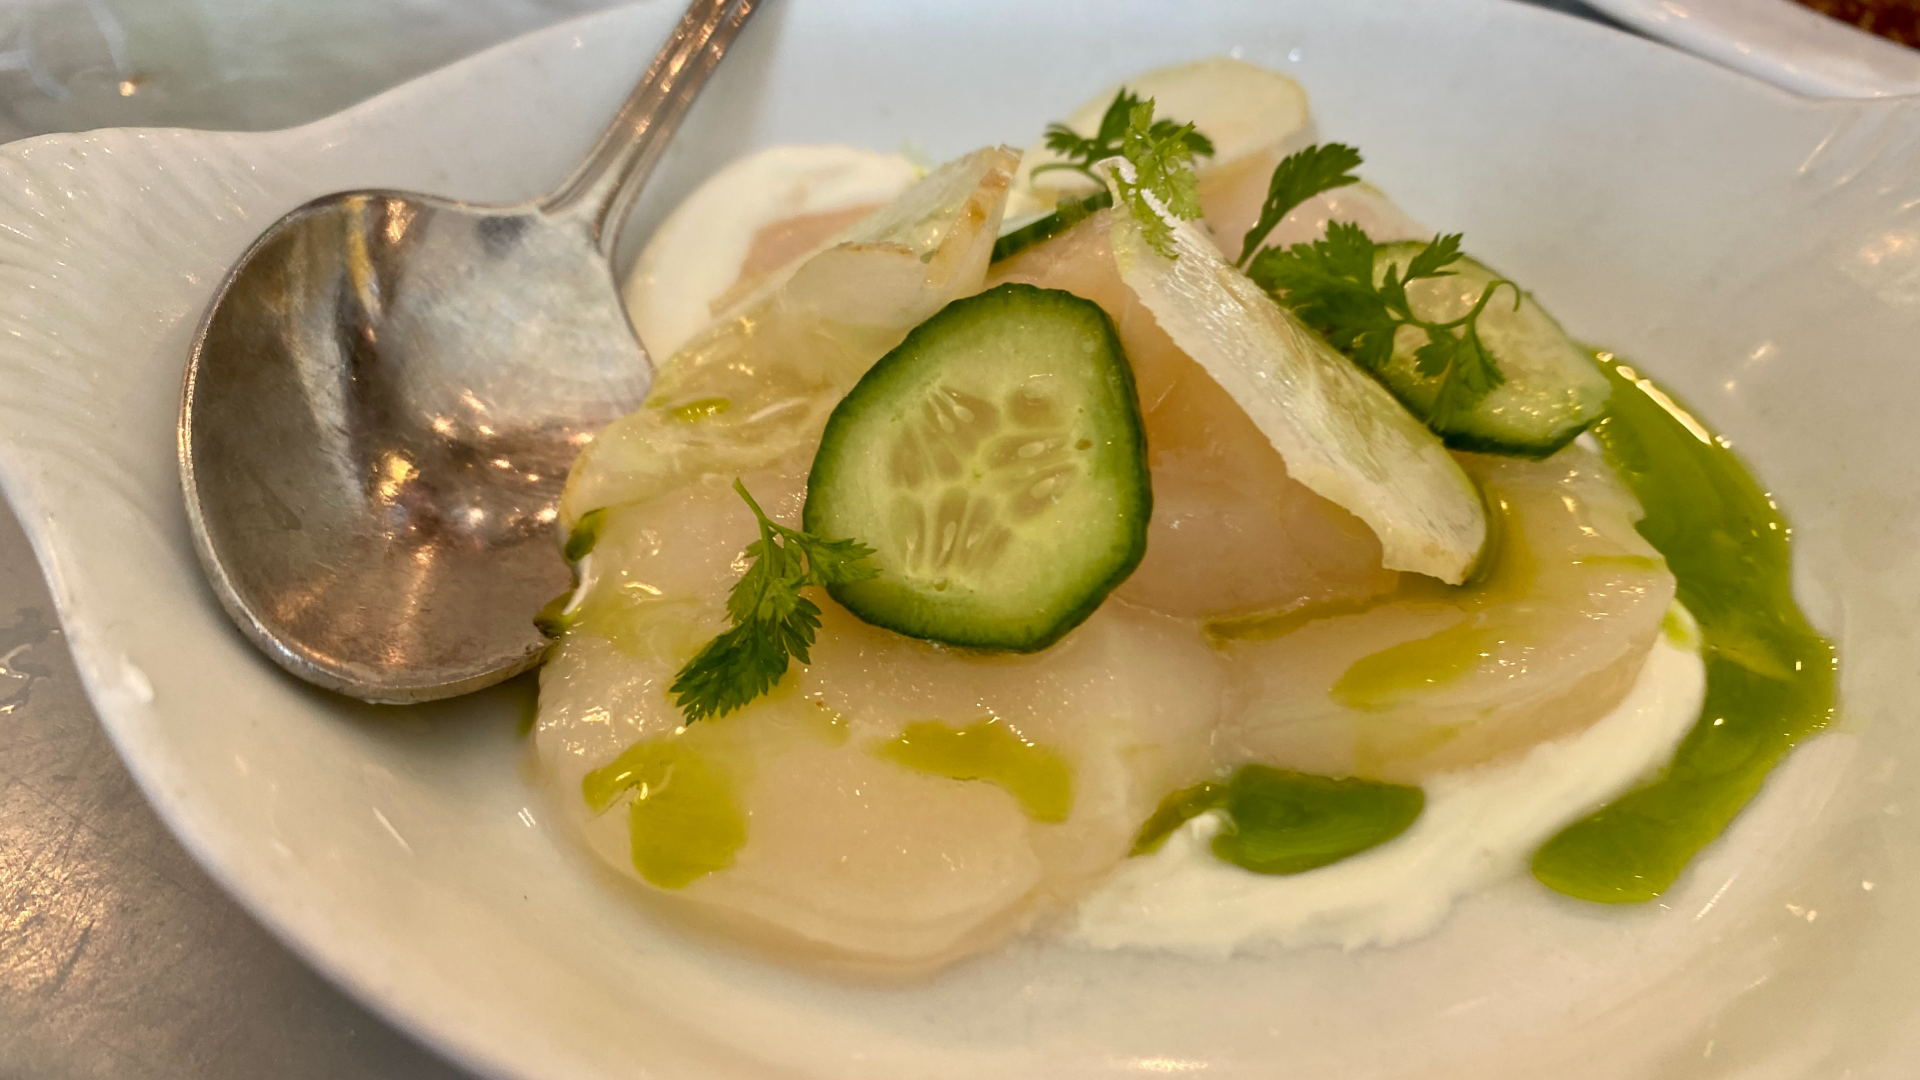 Raw white fish topped with a green oil and cucumber on a plate of creme fraiche.